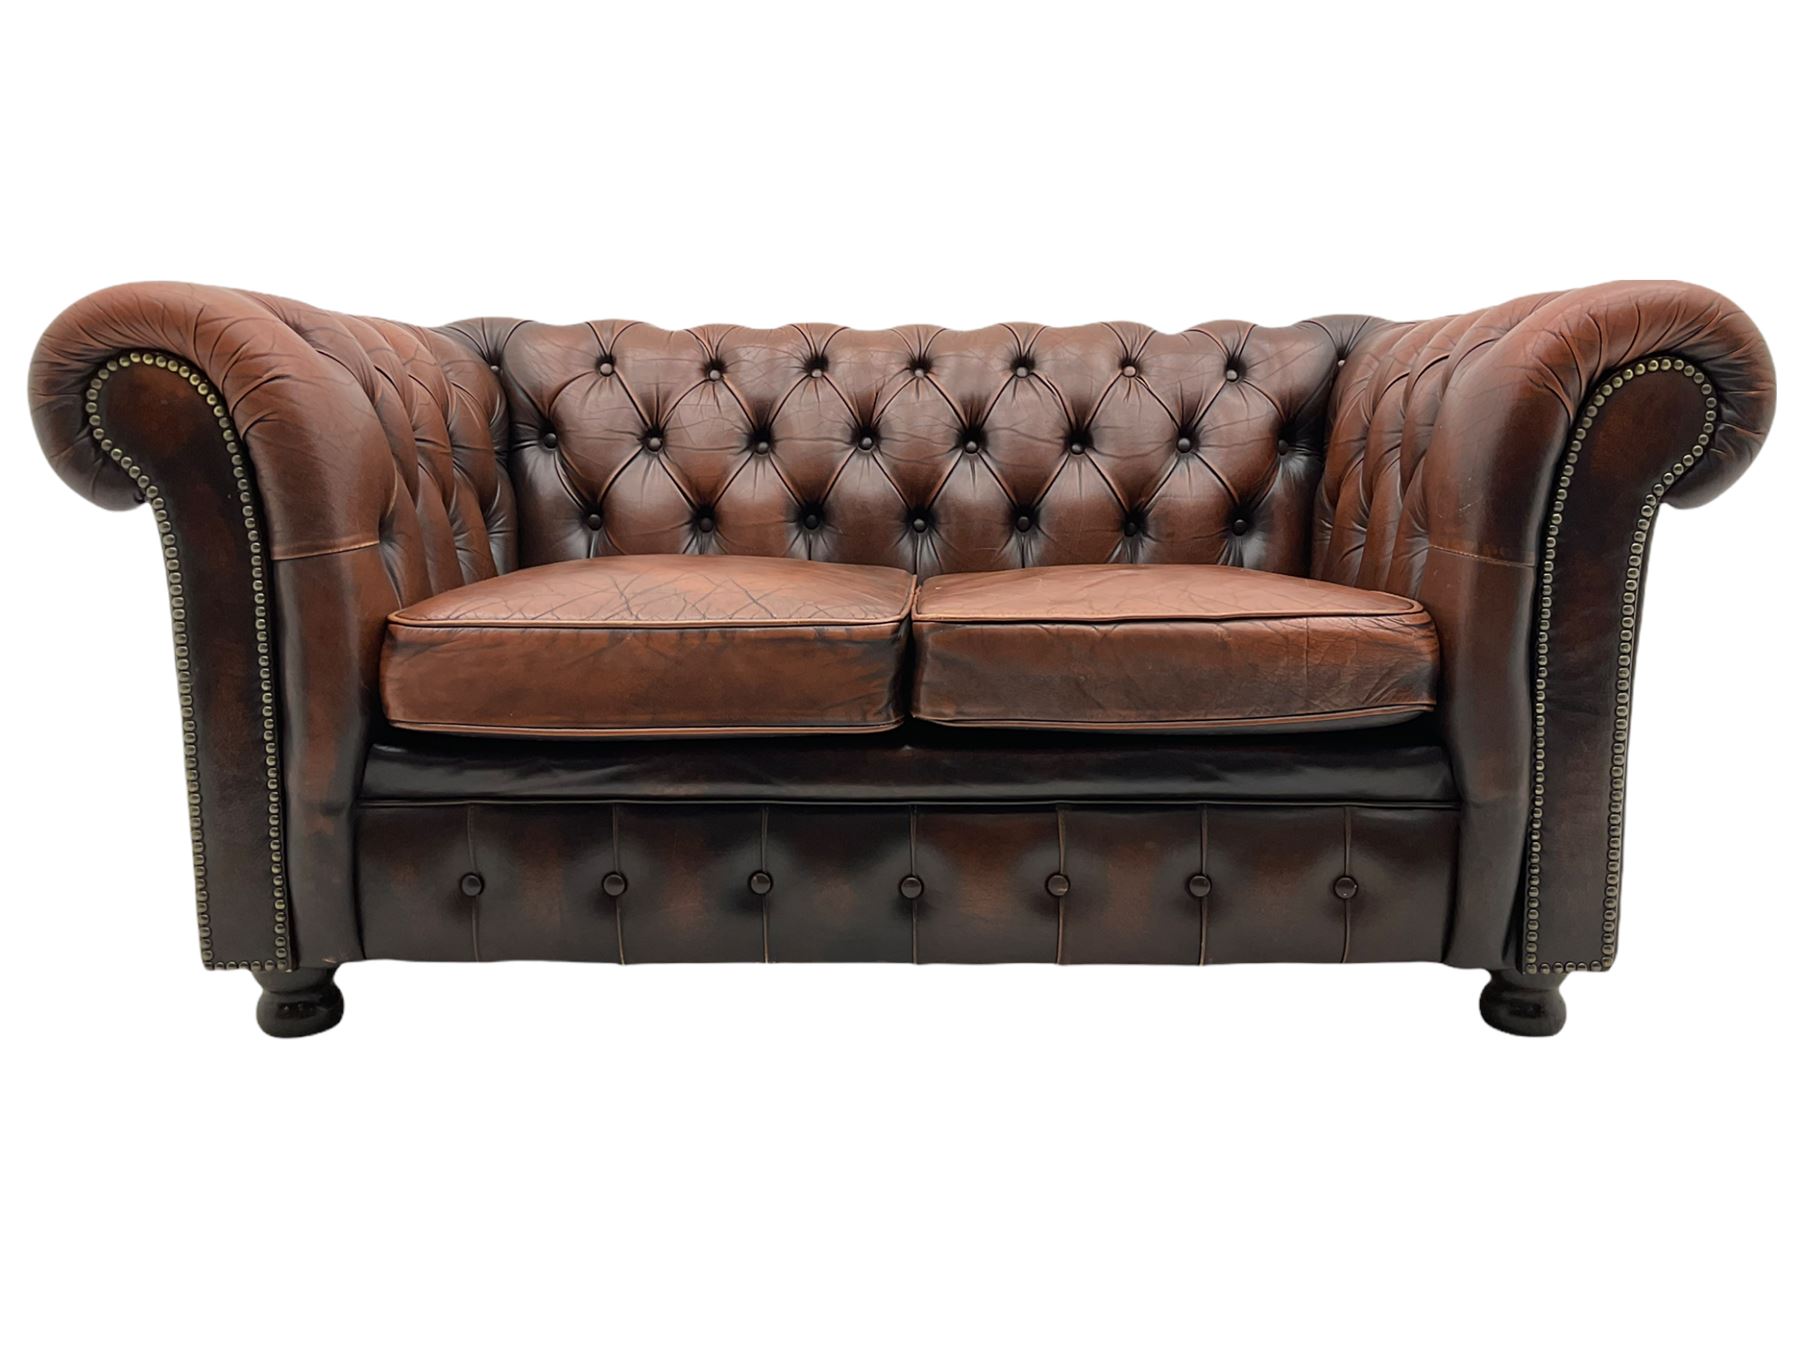 Chesterfield two seat sofa